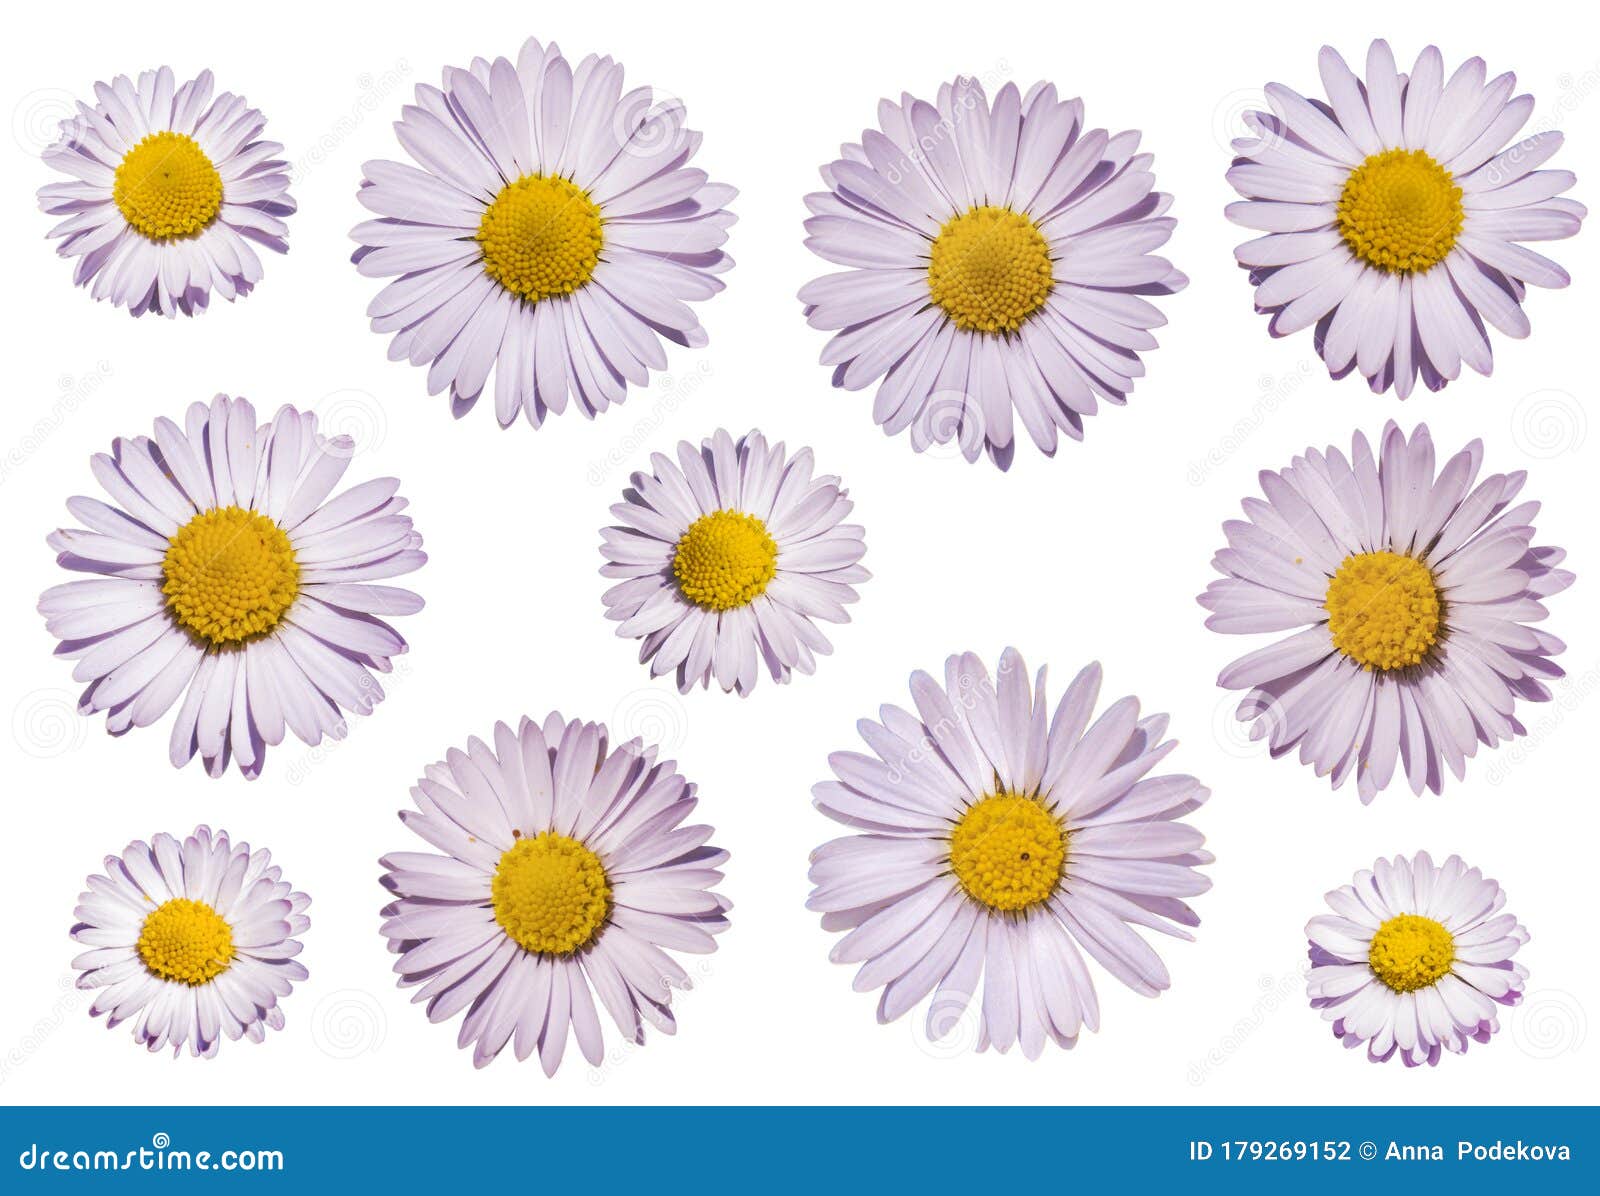 daisy or moonflower or marguerite flower  on transparency.